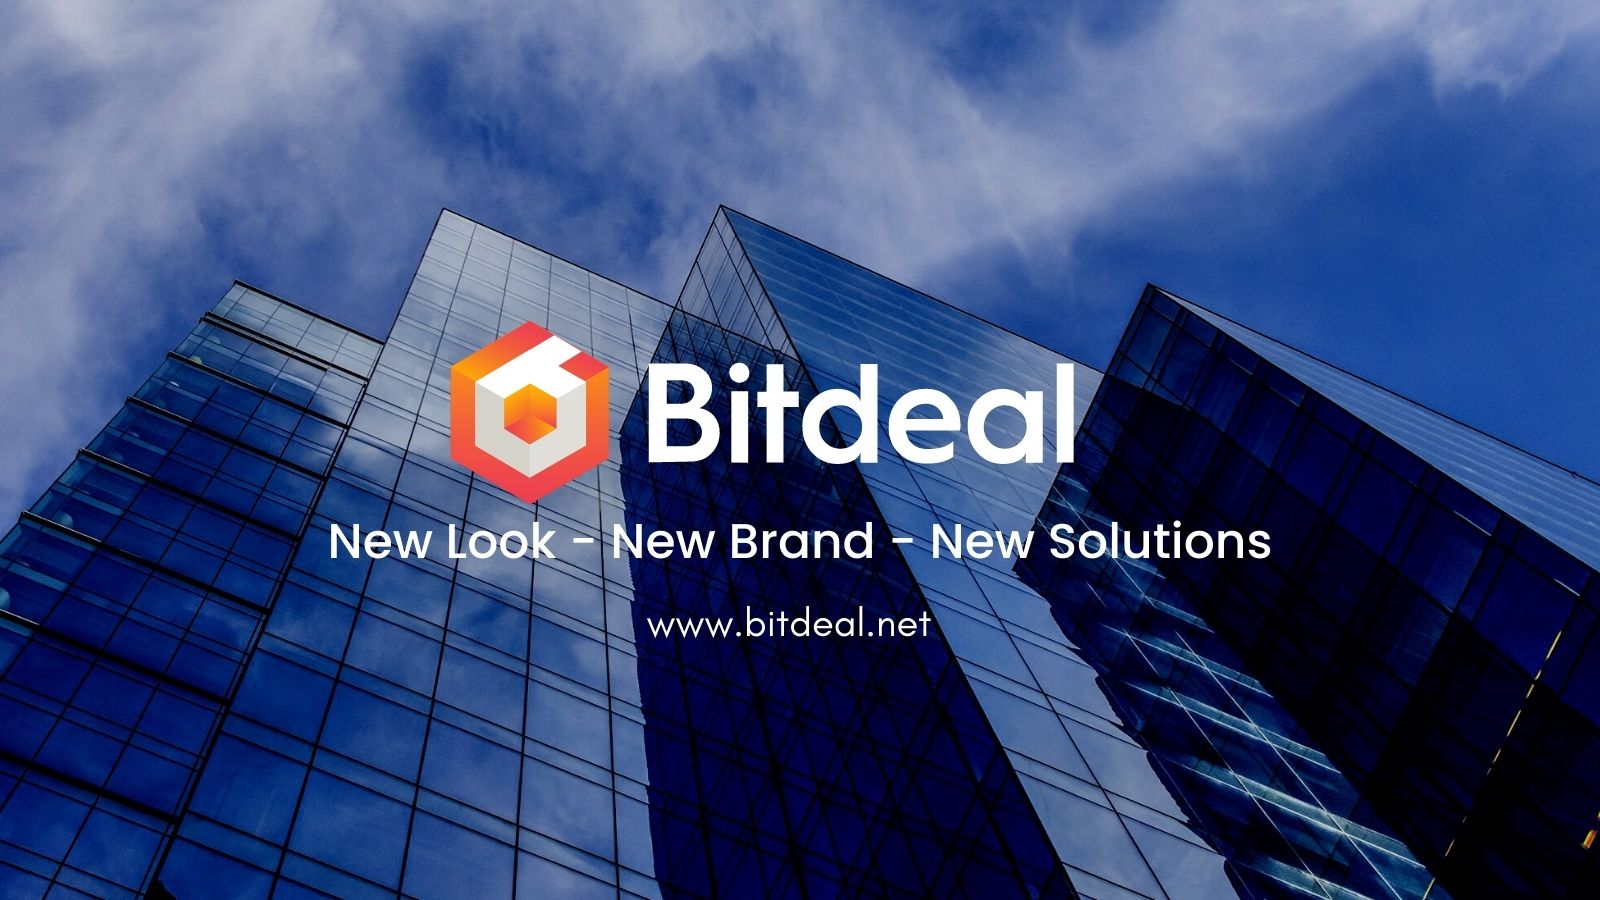 Bitdeal Proudly Introduces New Vibrant Logo and Adopts New Brand Identity as “Enterprise Blockchain Solutions Provider”.